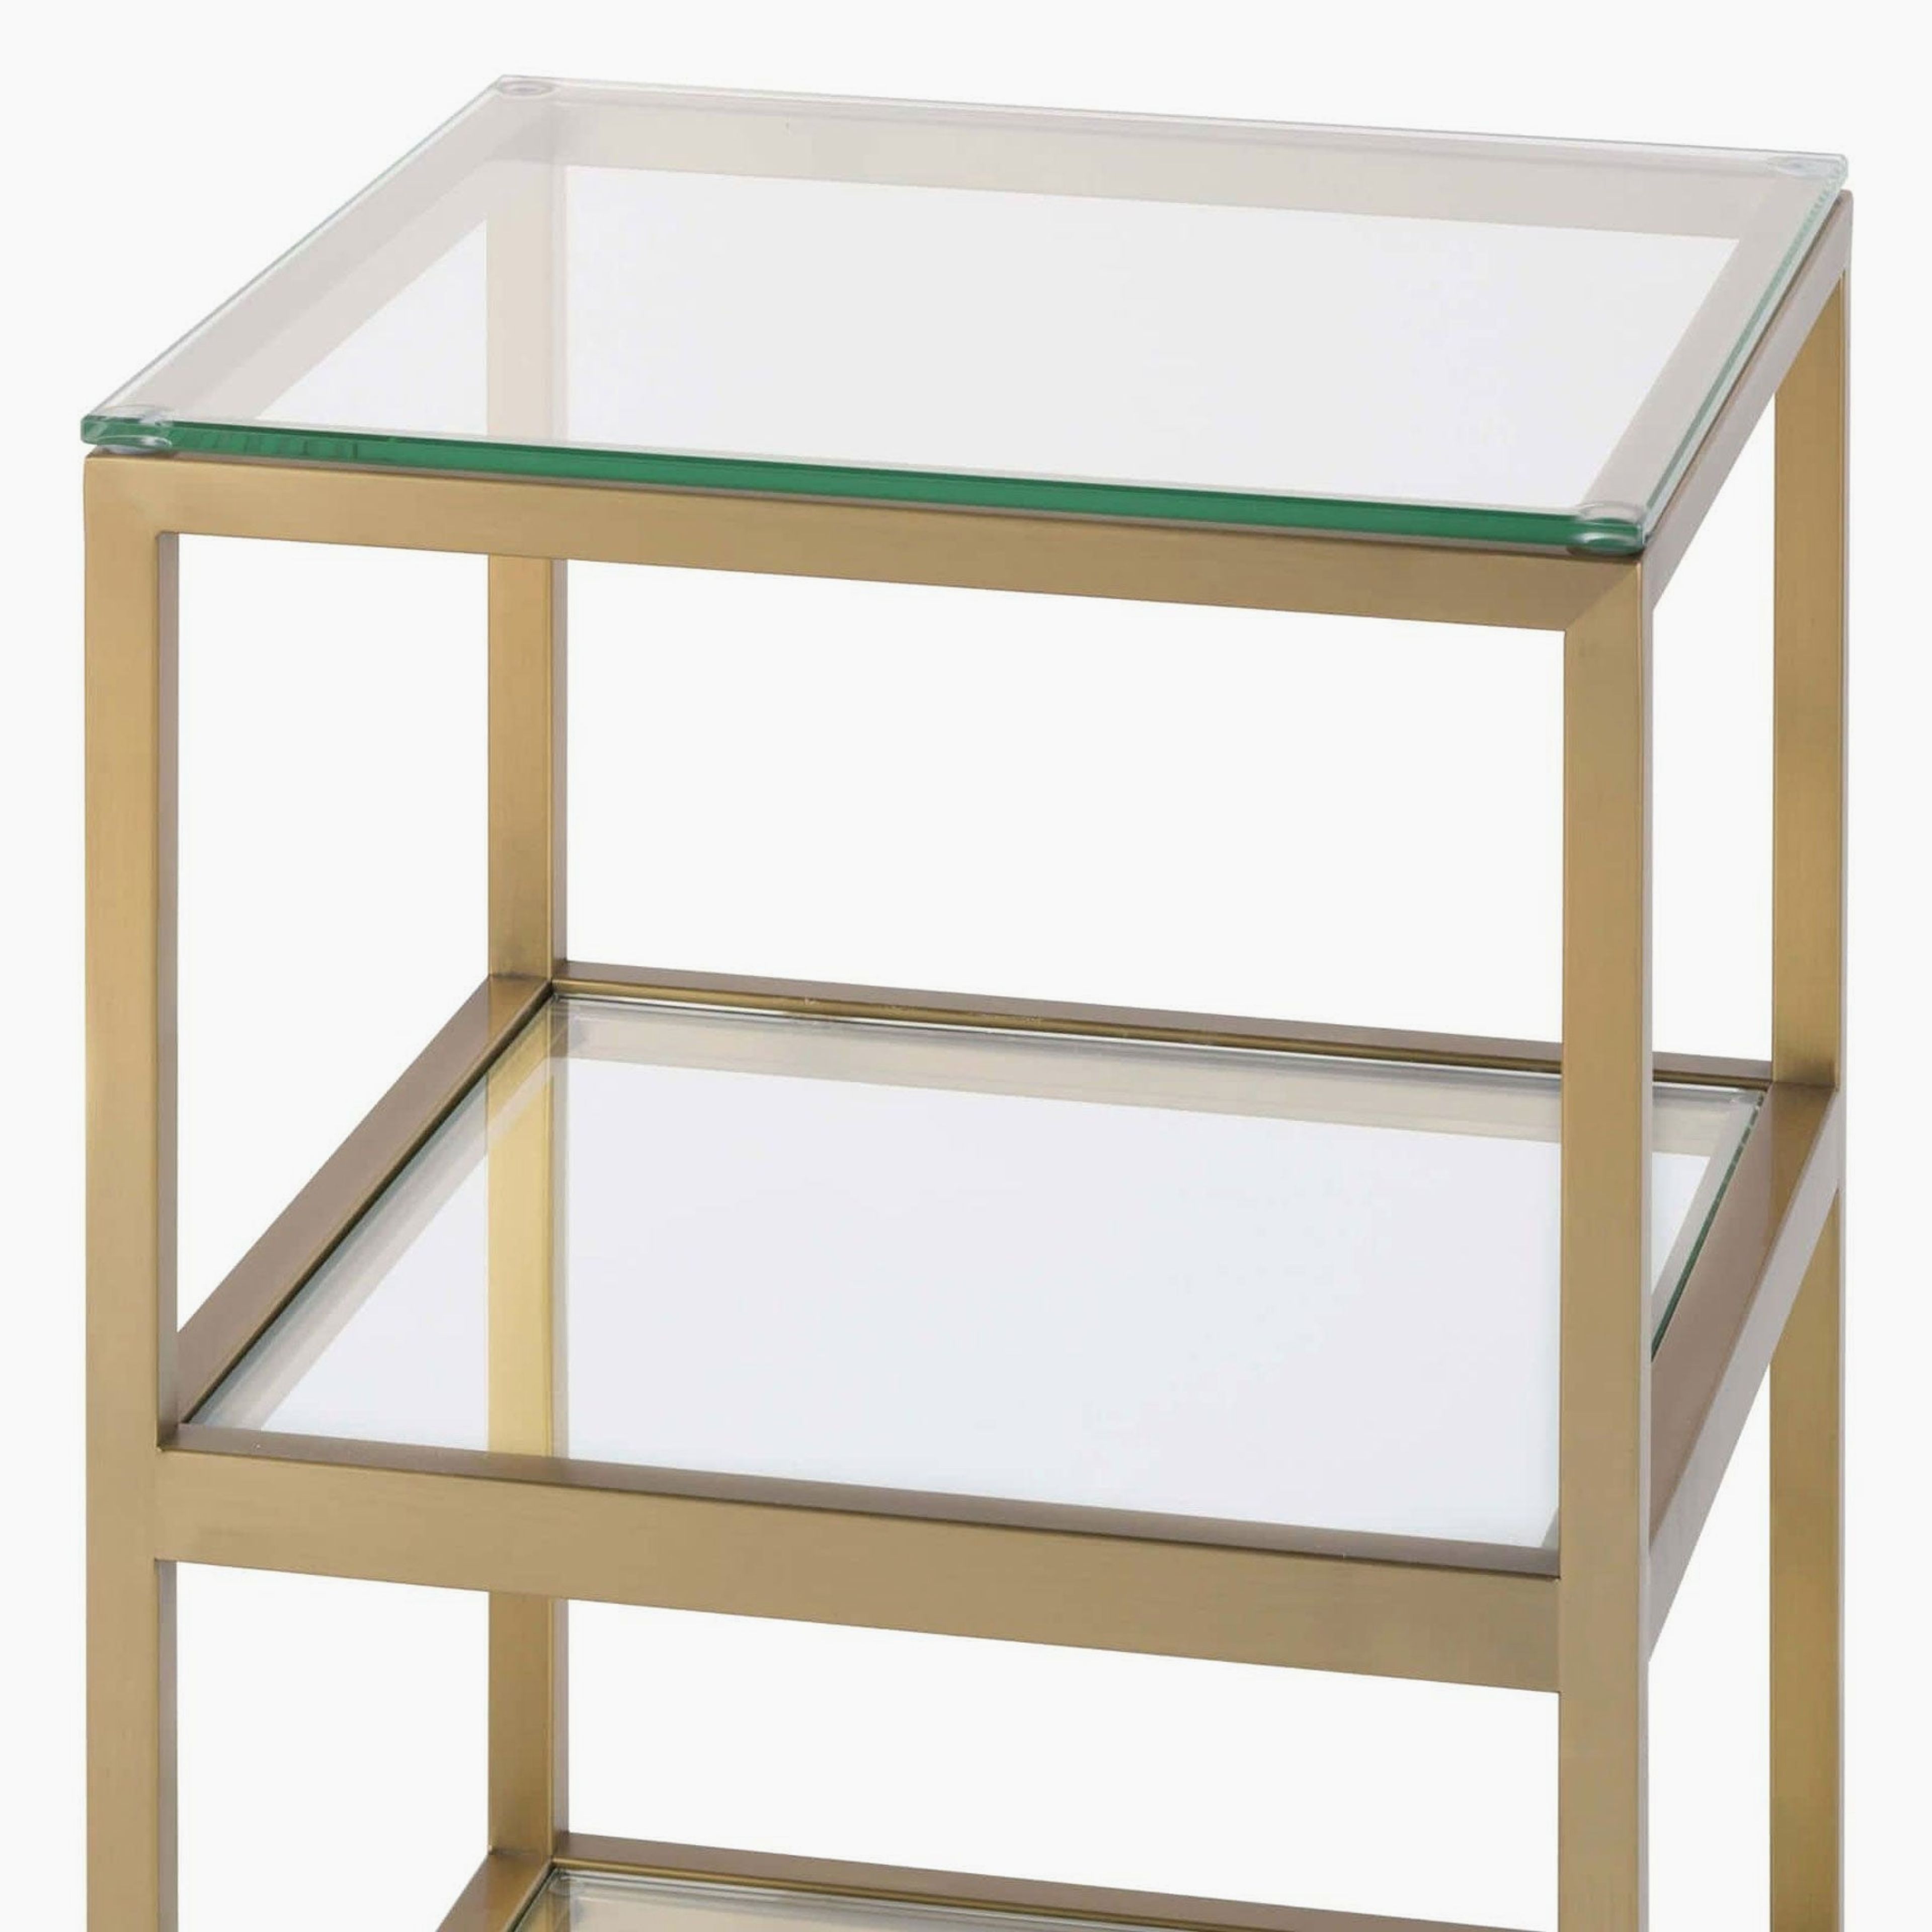 Attalee Three-Tiered Side Table